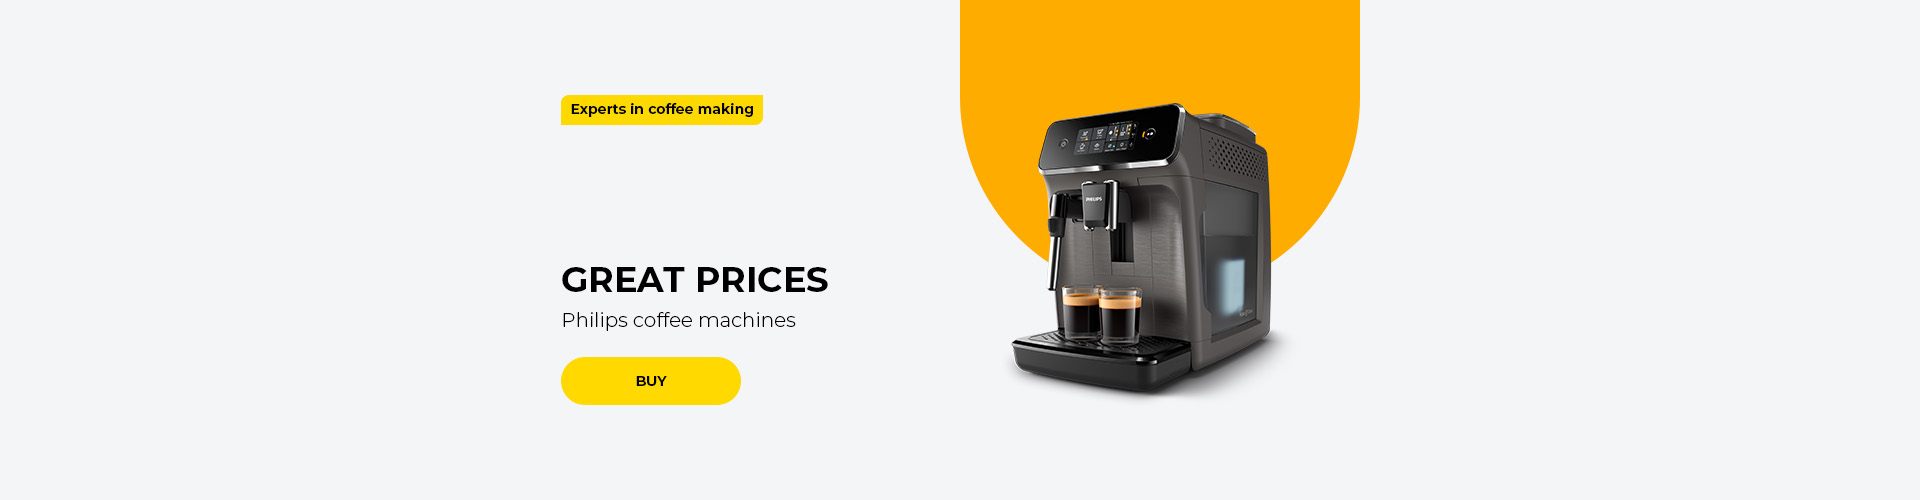 GREAT PRICES Philips coffee machines